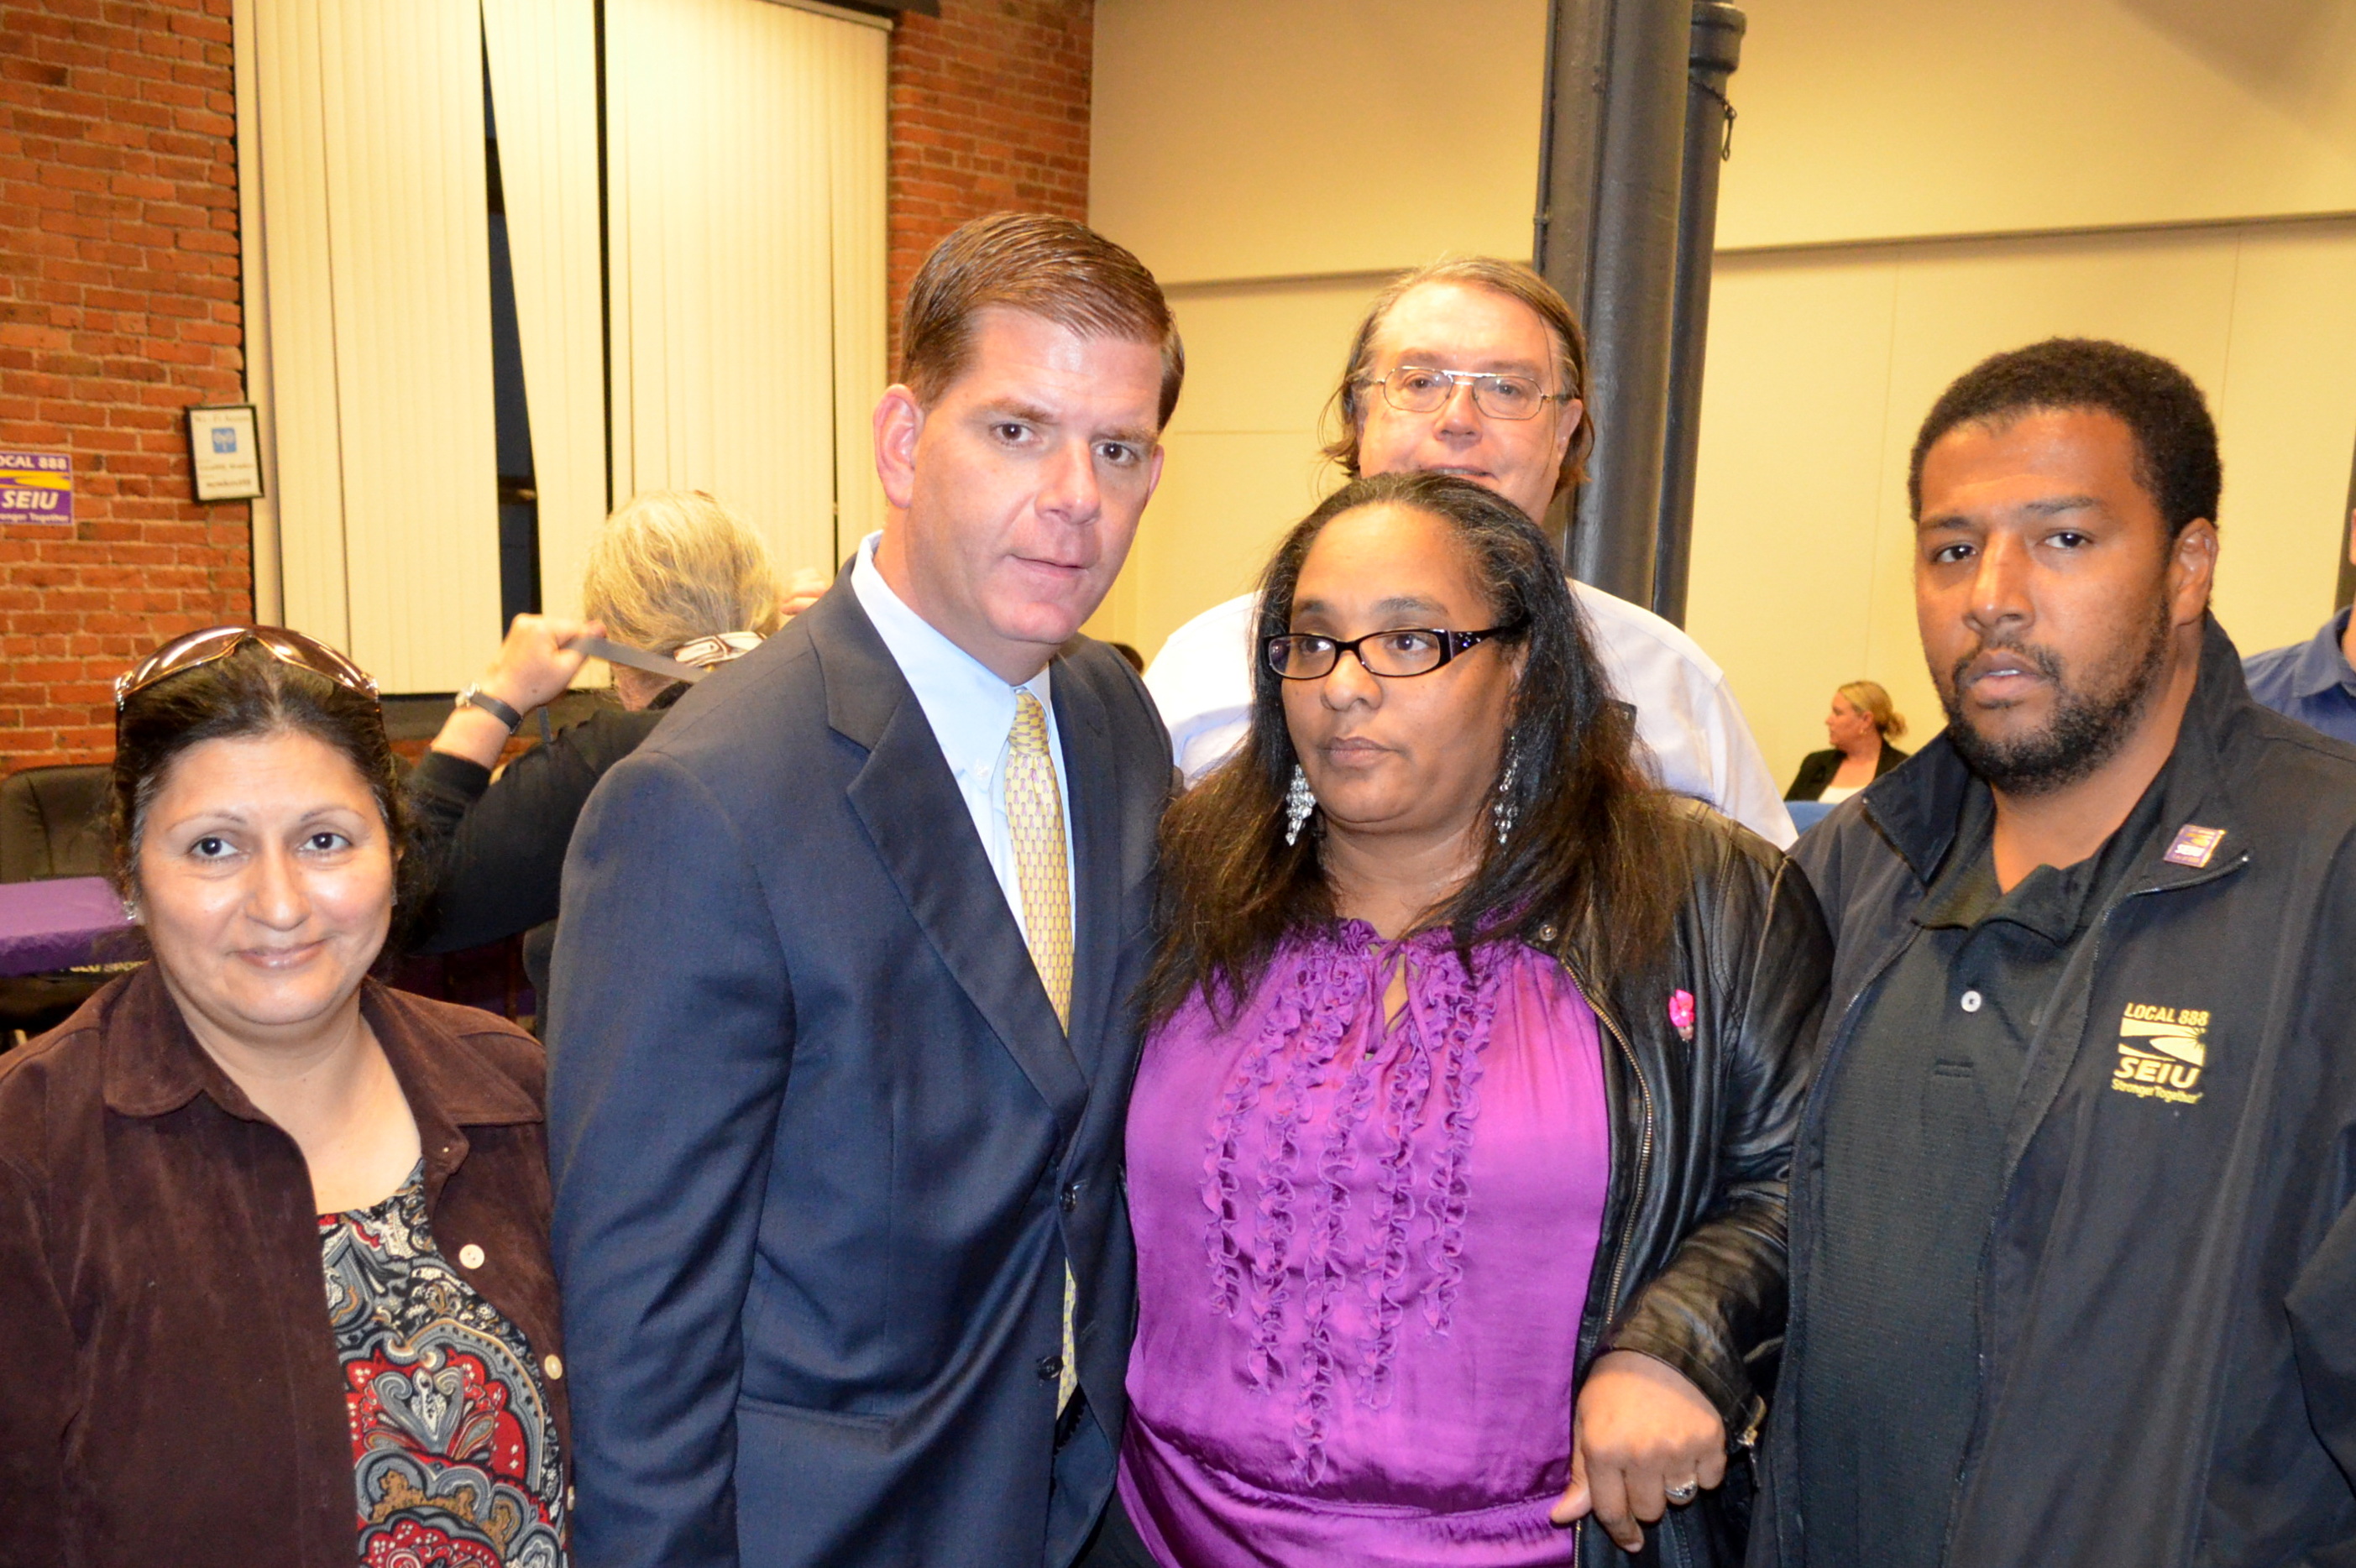 Marty Walsh with members after the Oct. 10 political forum